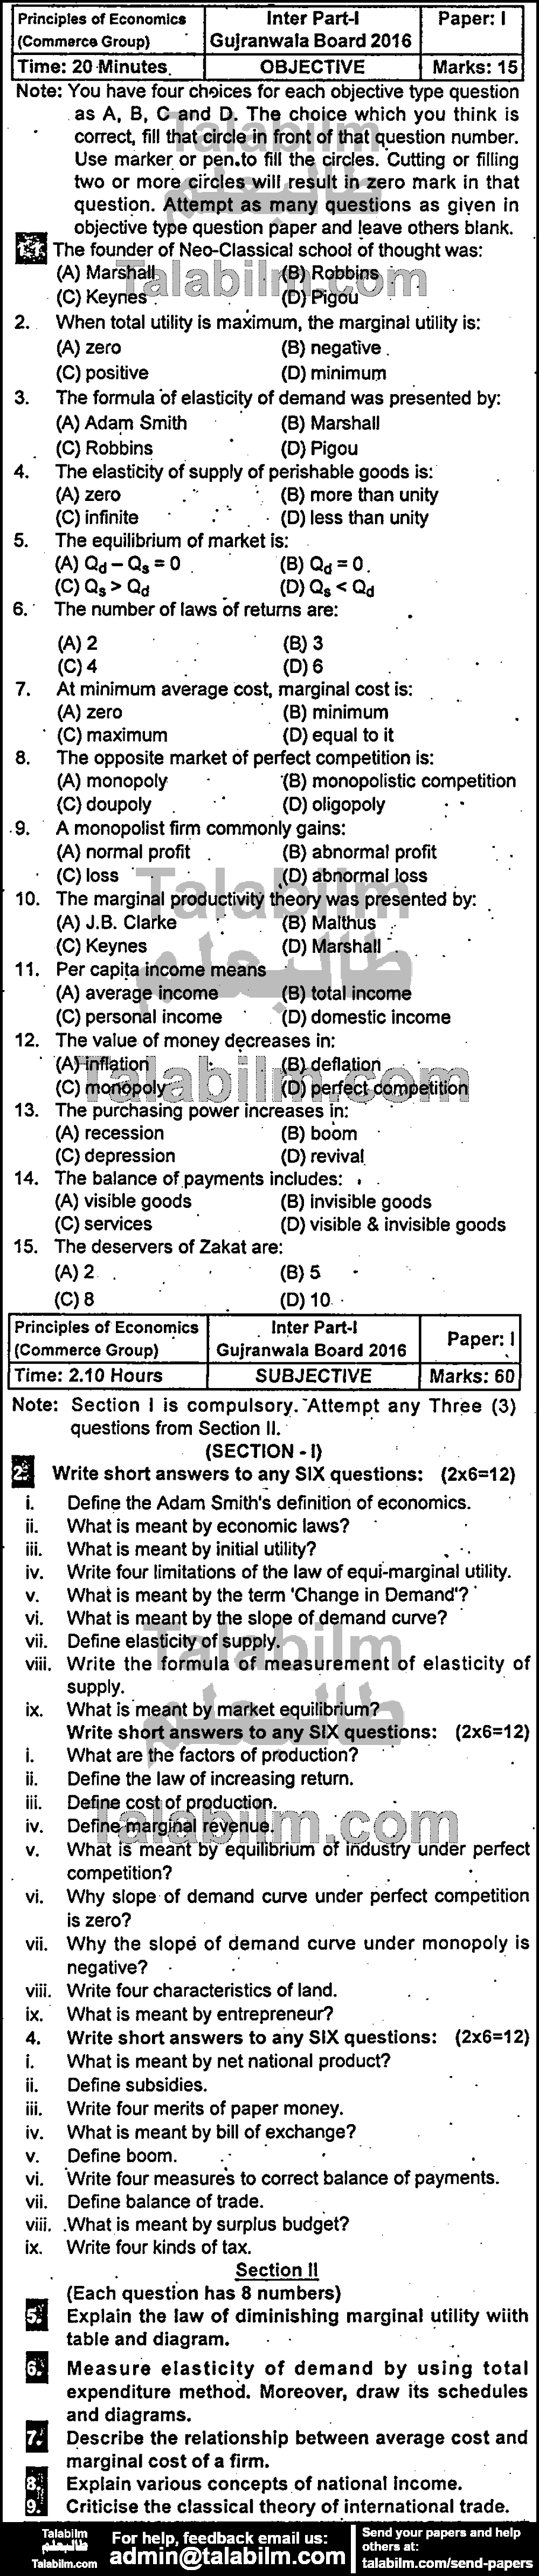 Principles Of Economics 0 past paper for Group-I 2016